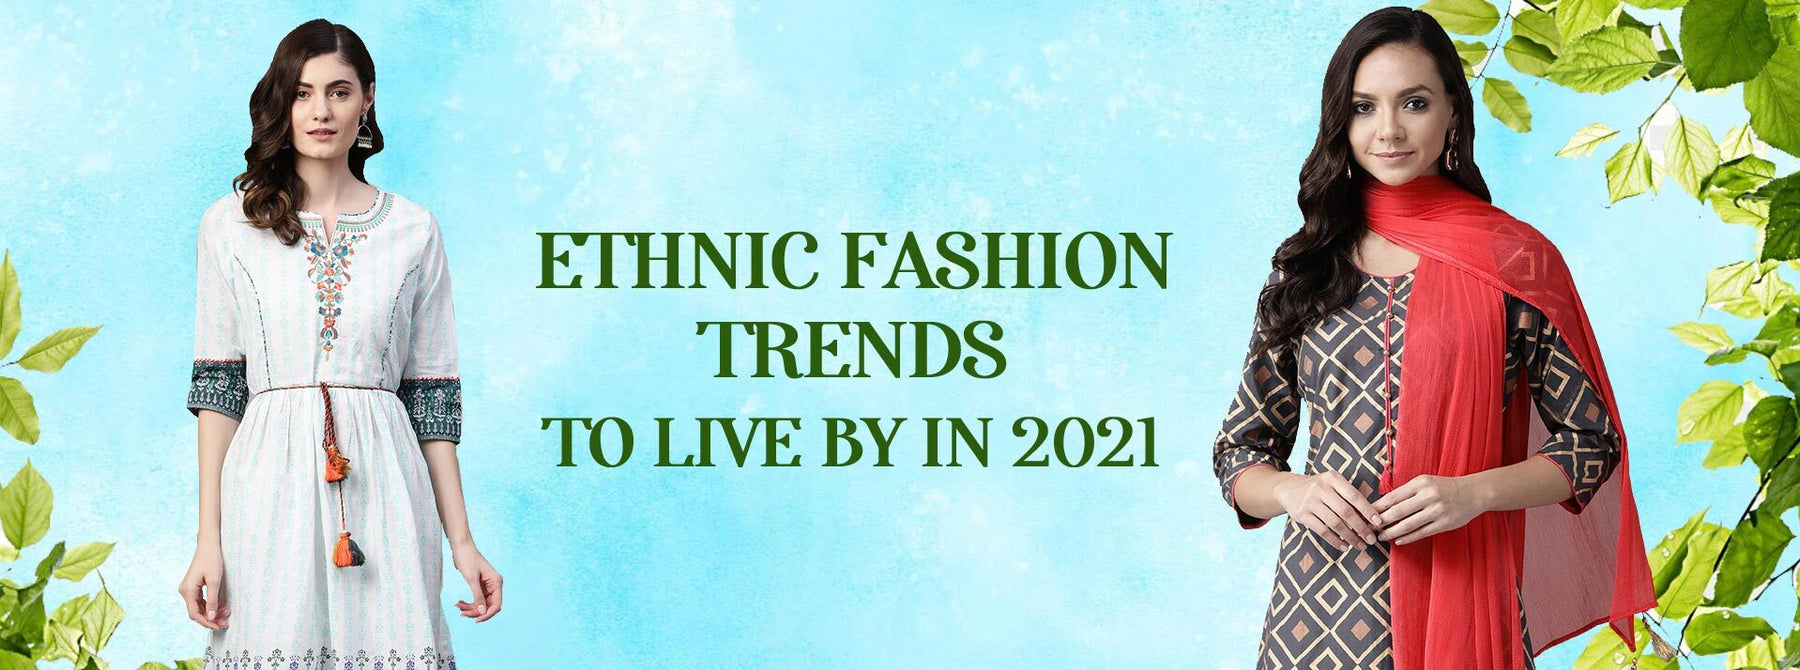 Ethnic Fashion Trends to Live by in 2021